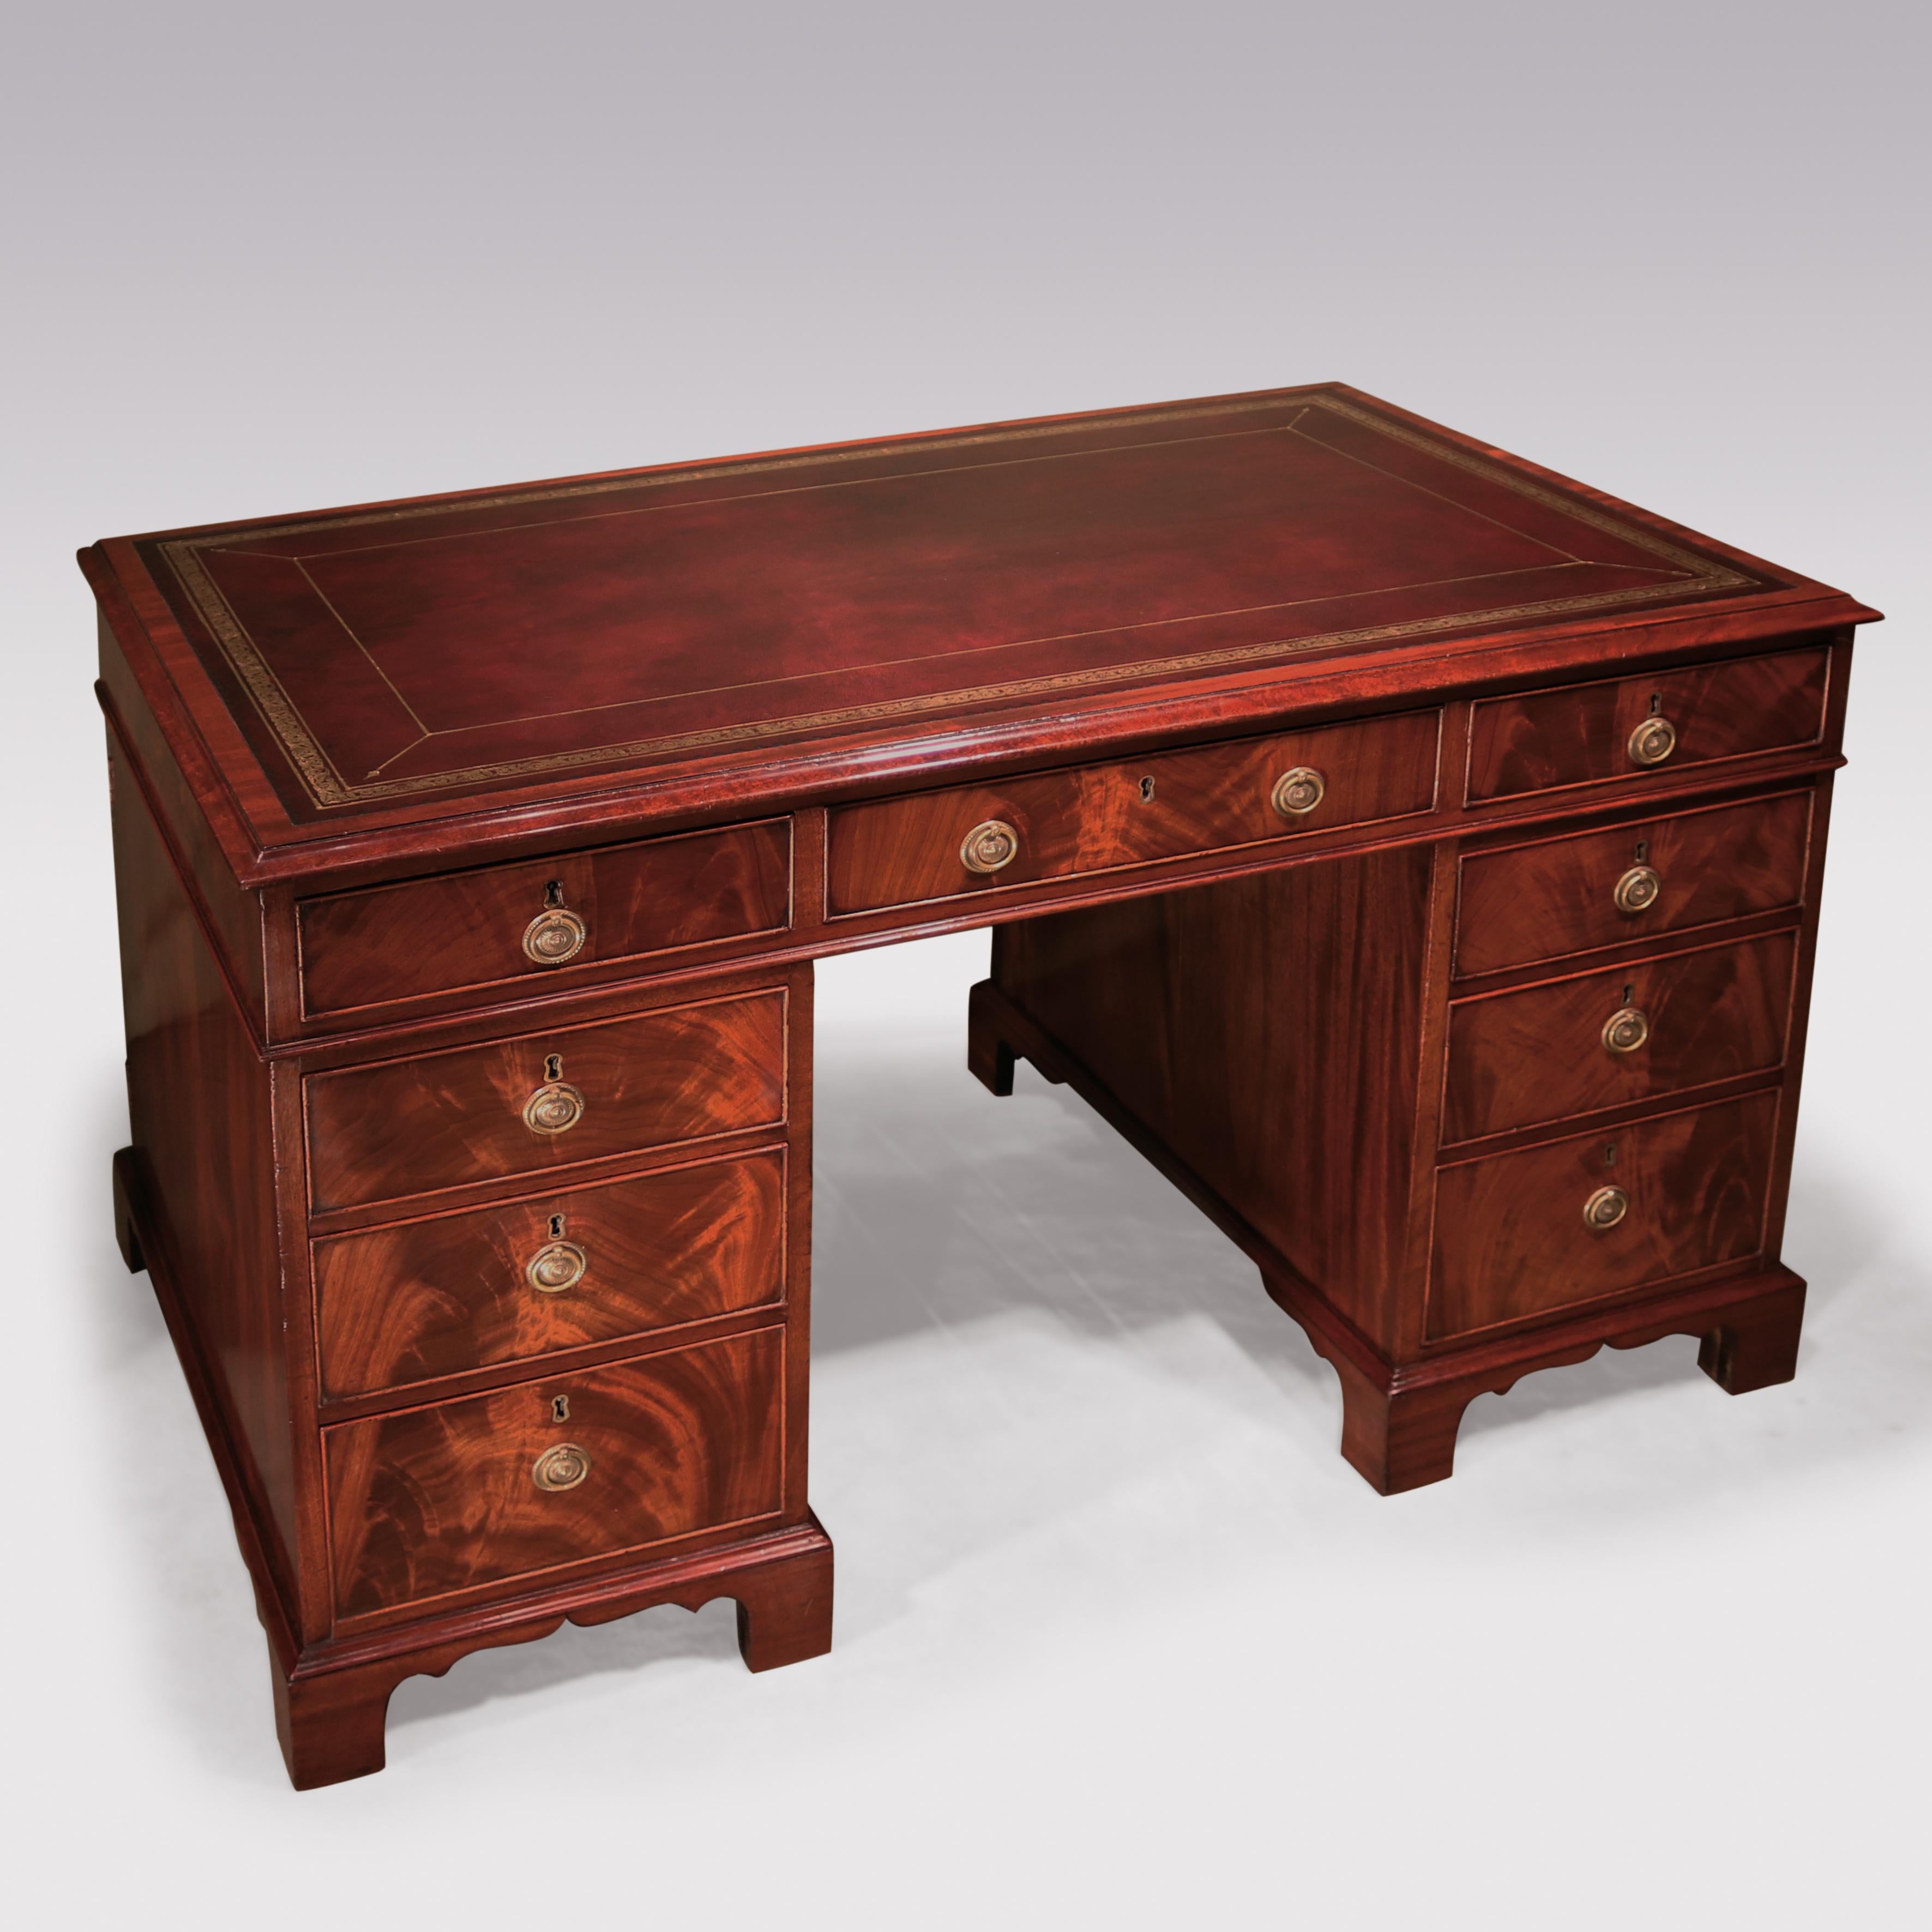 A fine quality late 18th century flame-figured mahogany pedestal desk of small proportions, having moulded edged gilt-tooled burgundy leather top with various cedar lined cockbeaded drawers to the front & panelled cupboard doors to the rear,